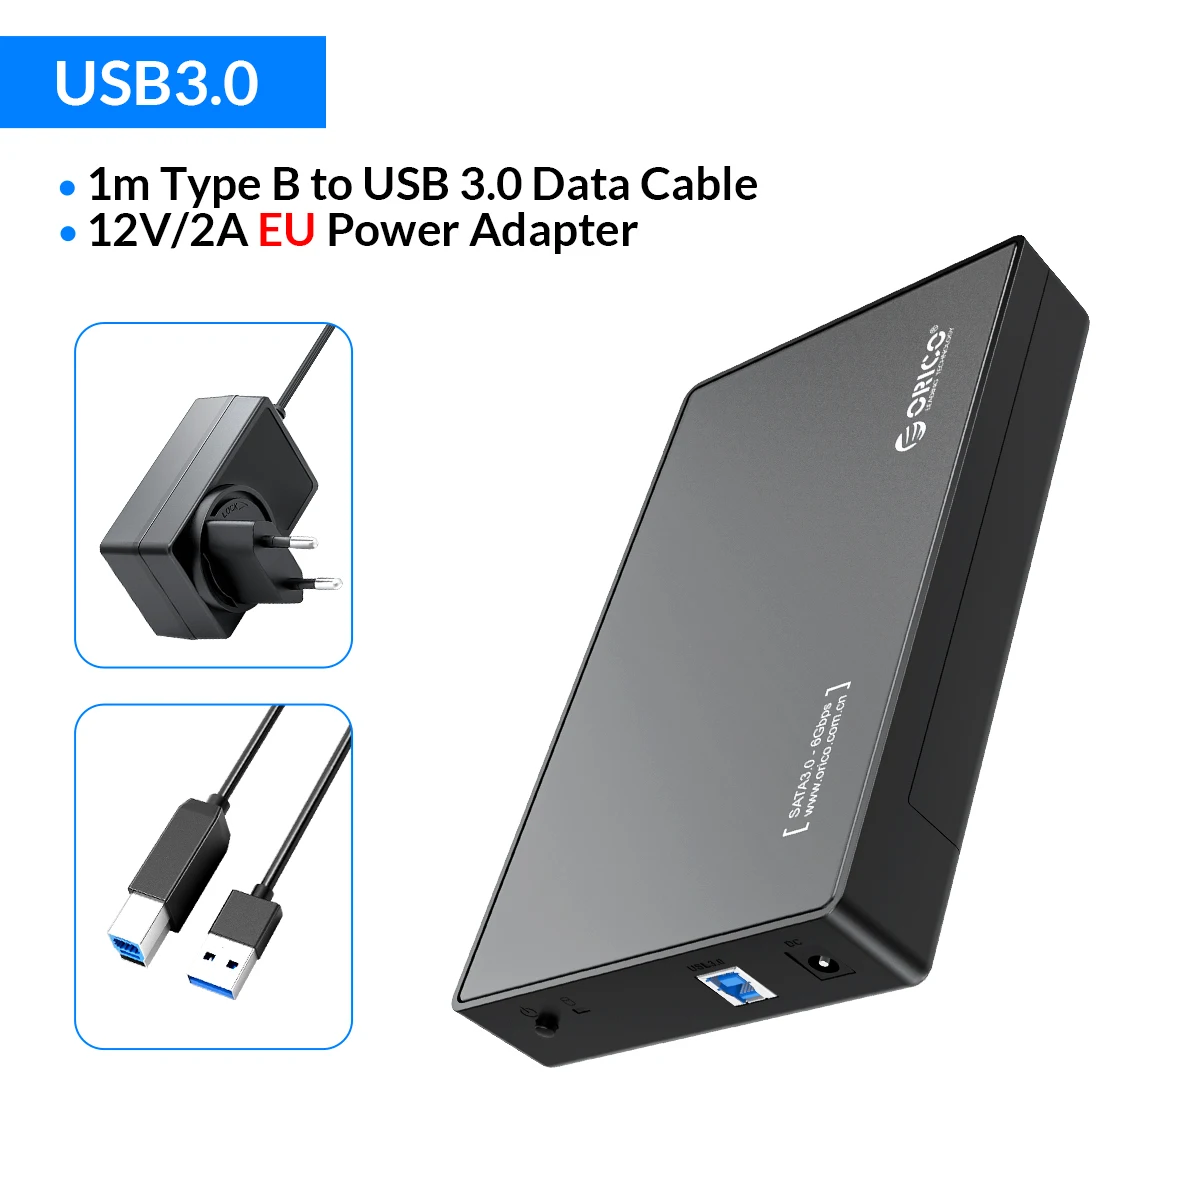 ORICO 3.5 inch External Hard Drive Enclosure SATA to USB 3.0 HDD Case with 12V/2A Power Adapter Support 16TB UASP Tool free 3.5 hdd external case usb 3.0 HDD Box Enclosures